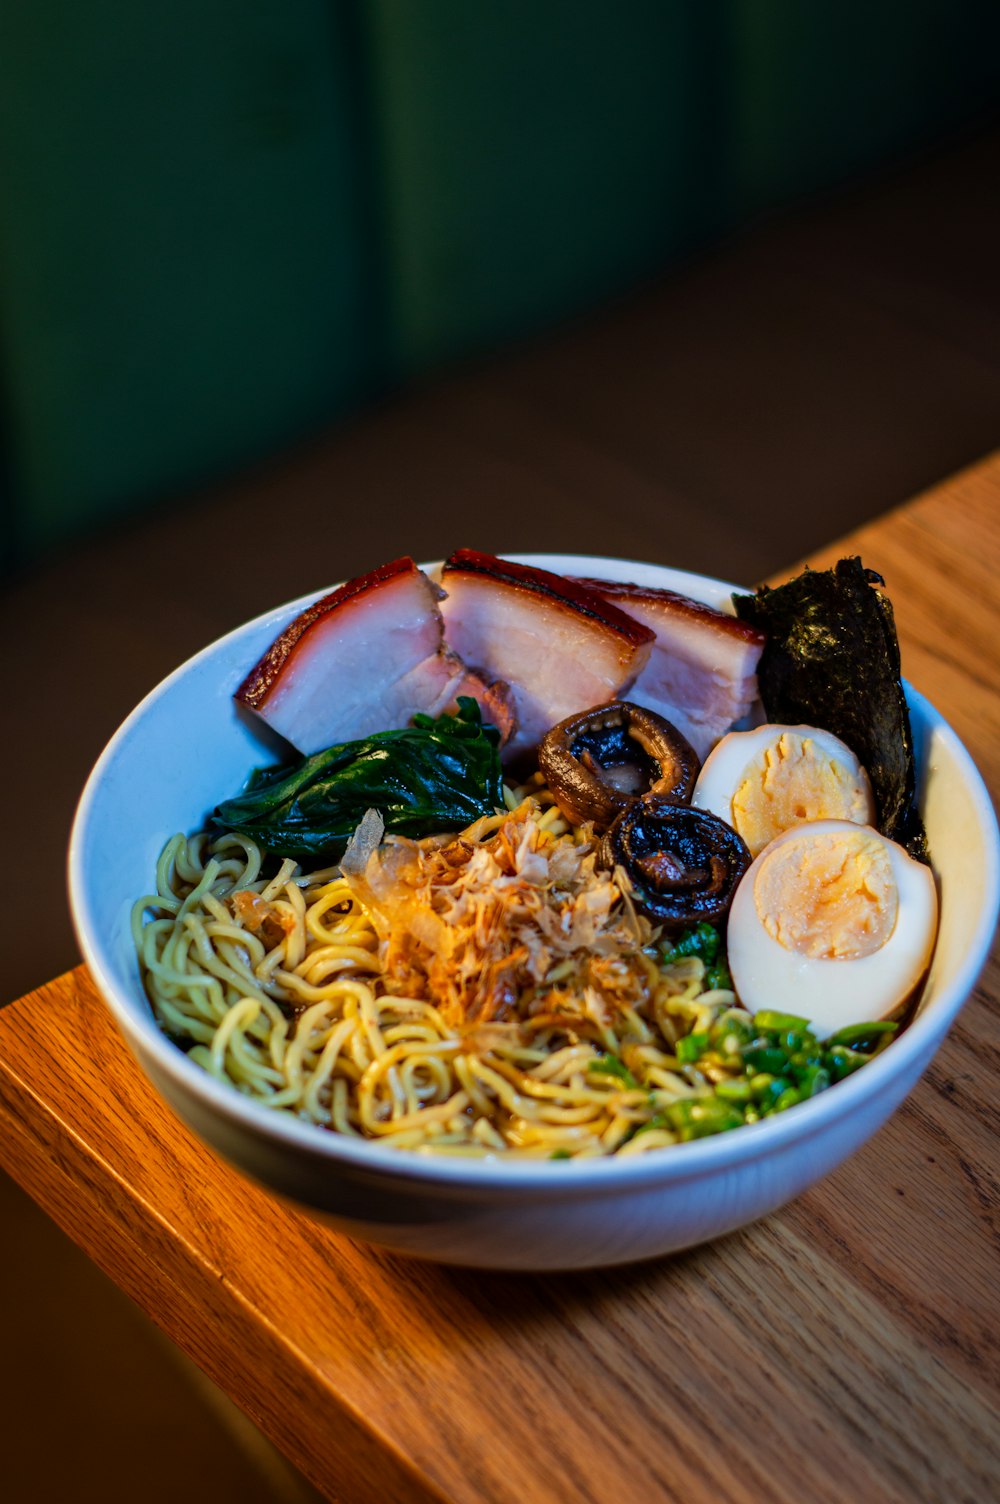 a bowl of noodles, meat, and vegetables on a wooden table